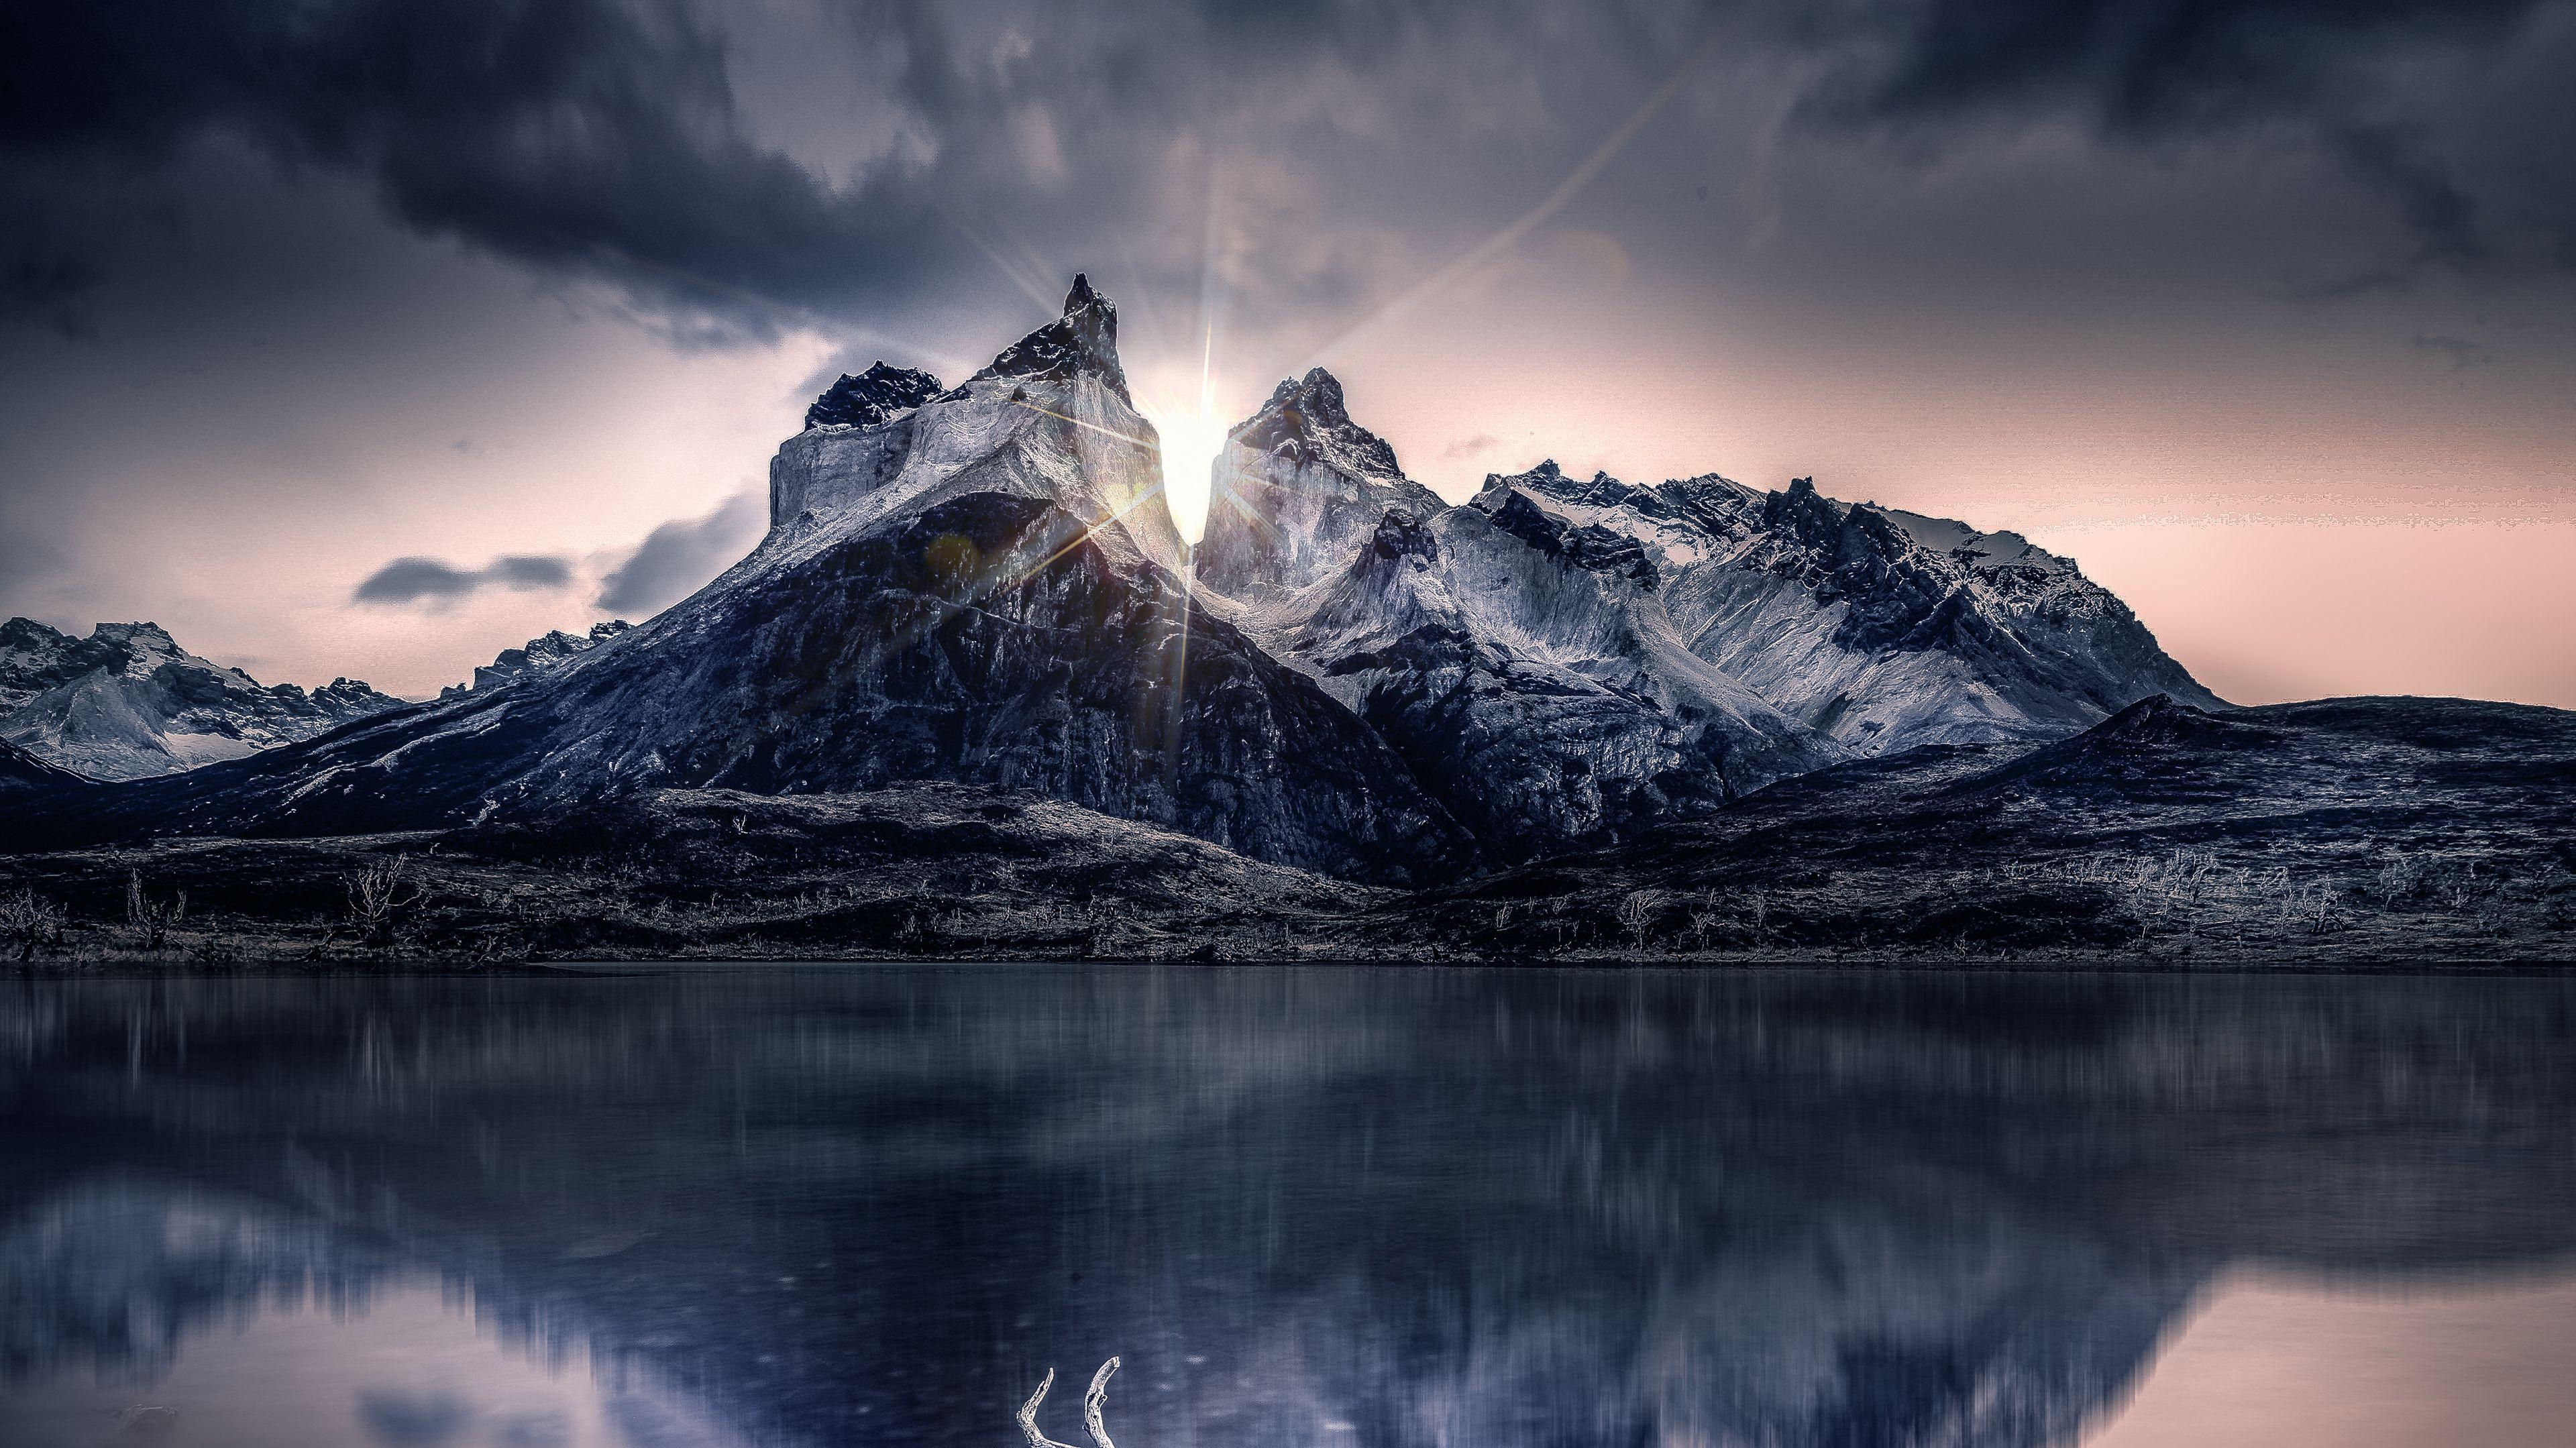 Full HD 1080p mountain wallpapers free download Page 2